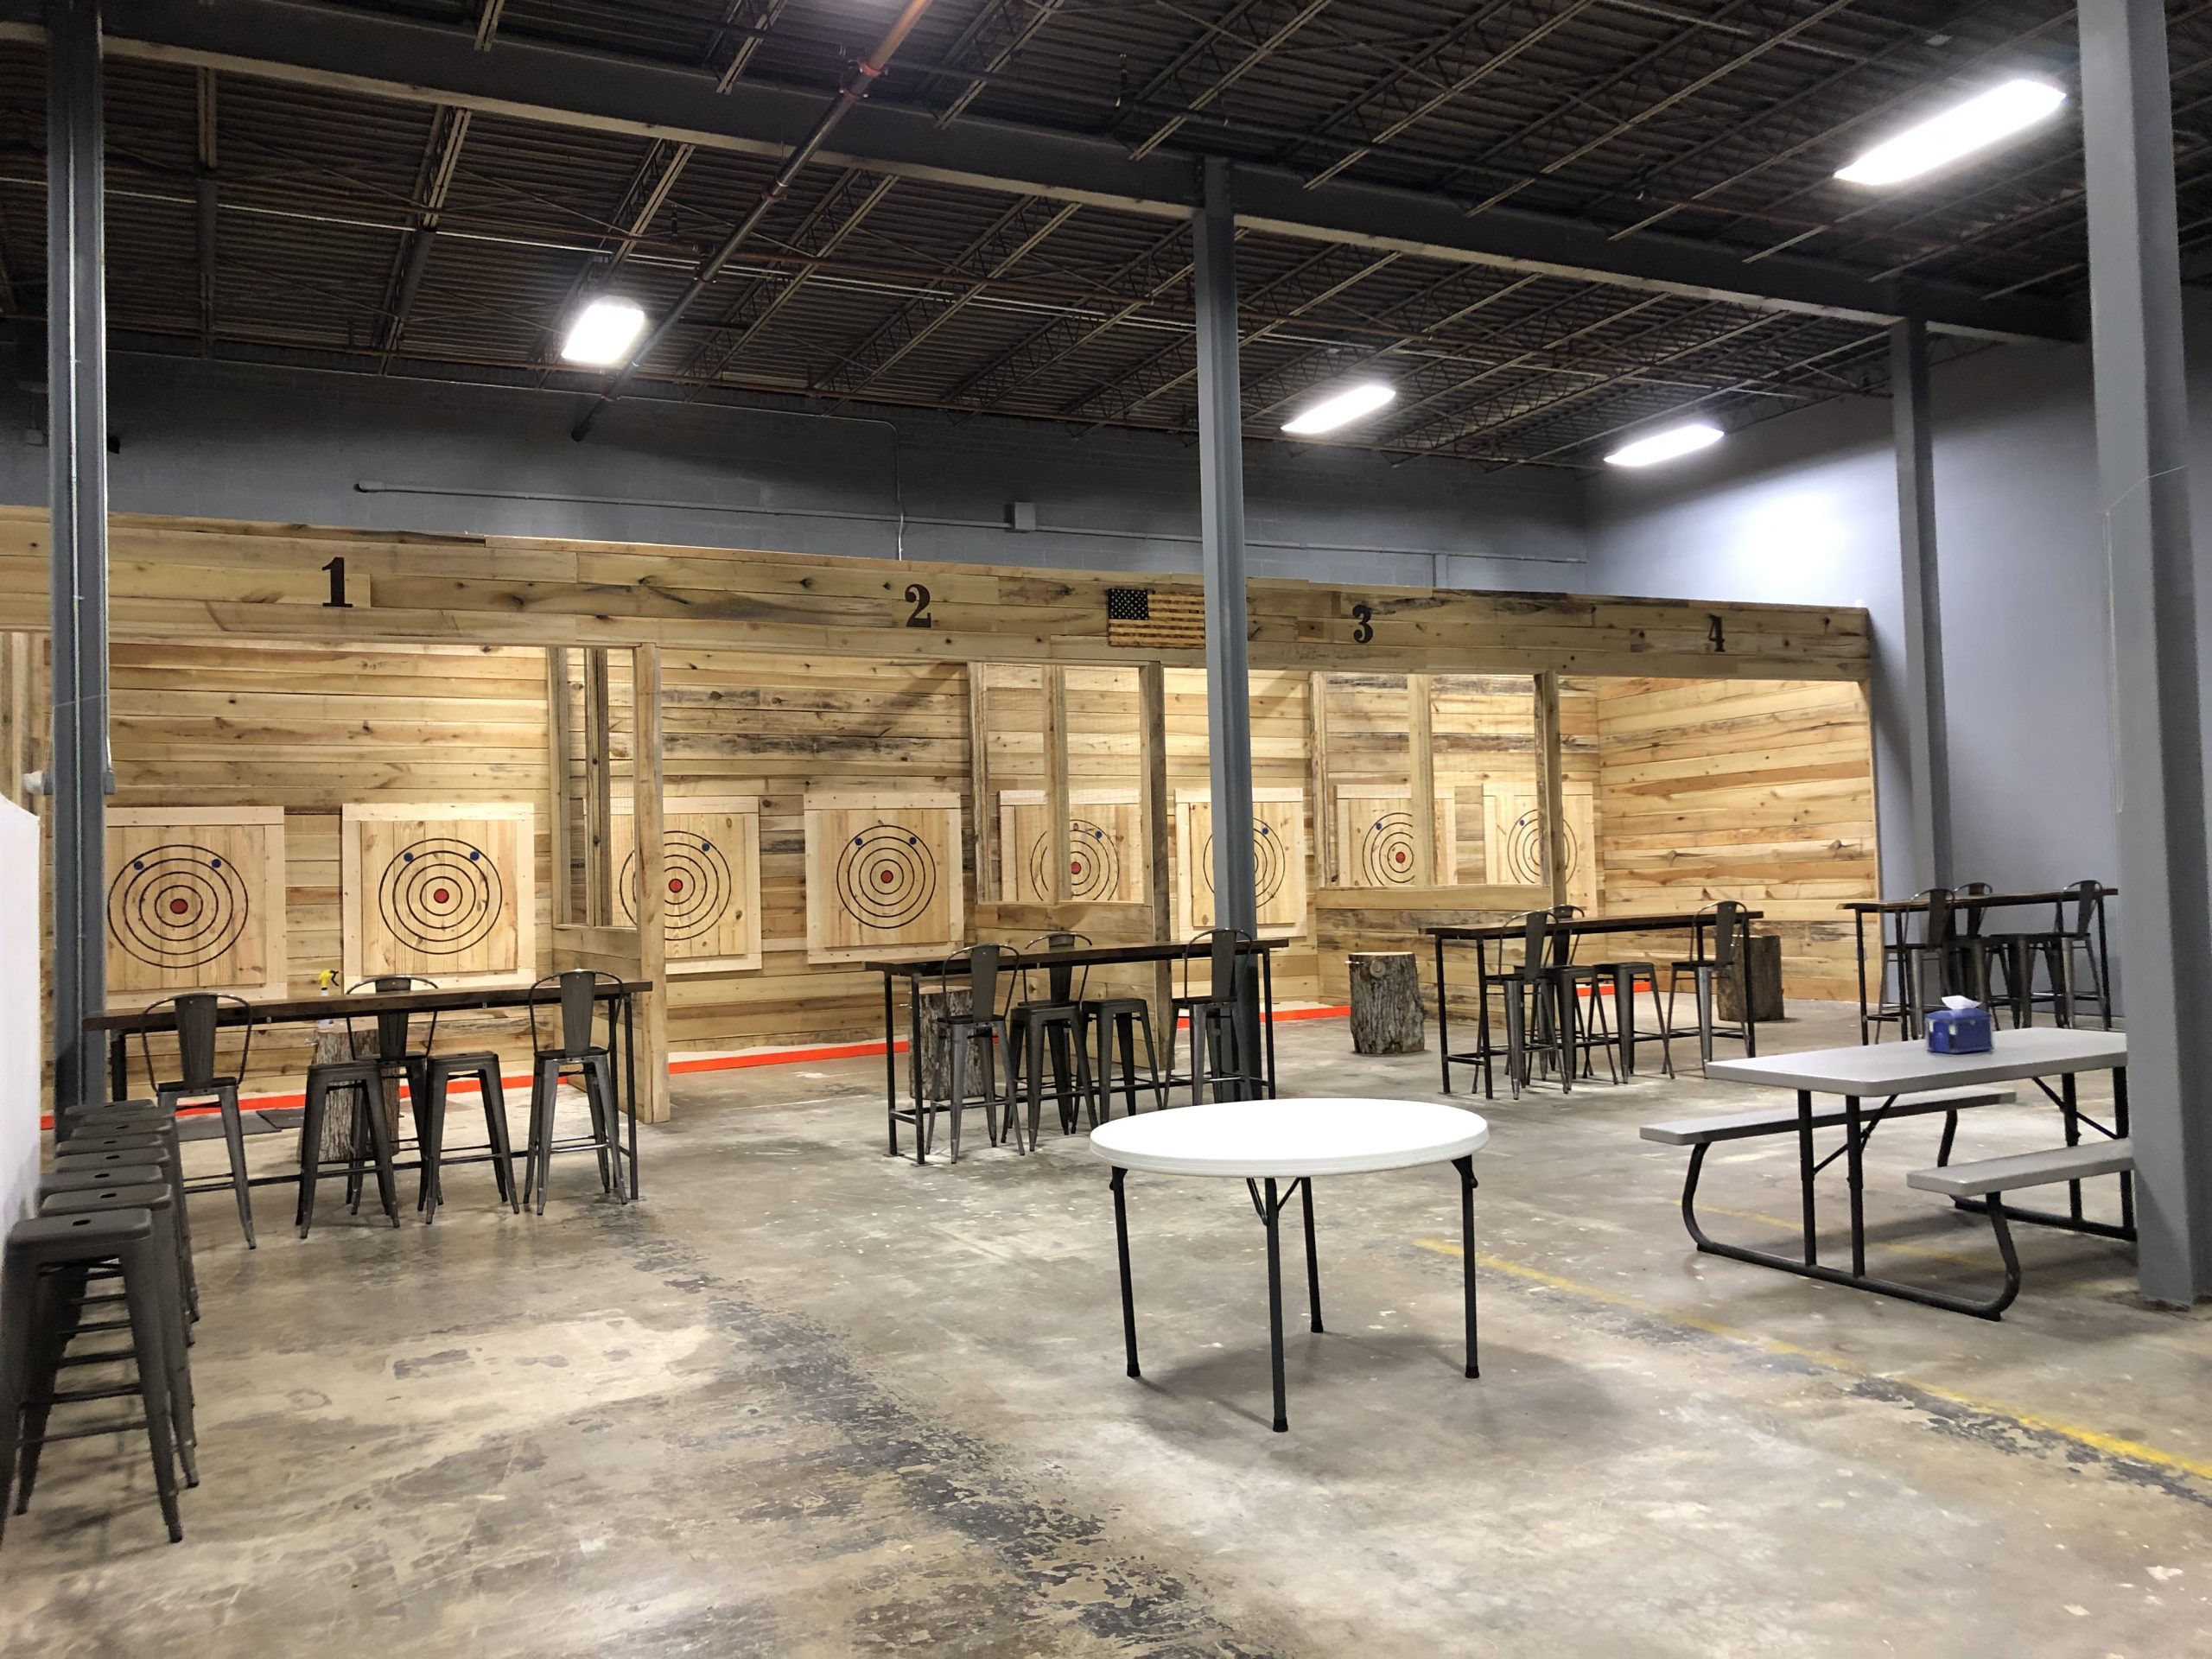 Badl Axe throwing in Johnson City, Tennessee